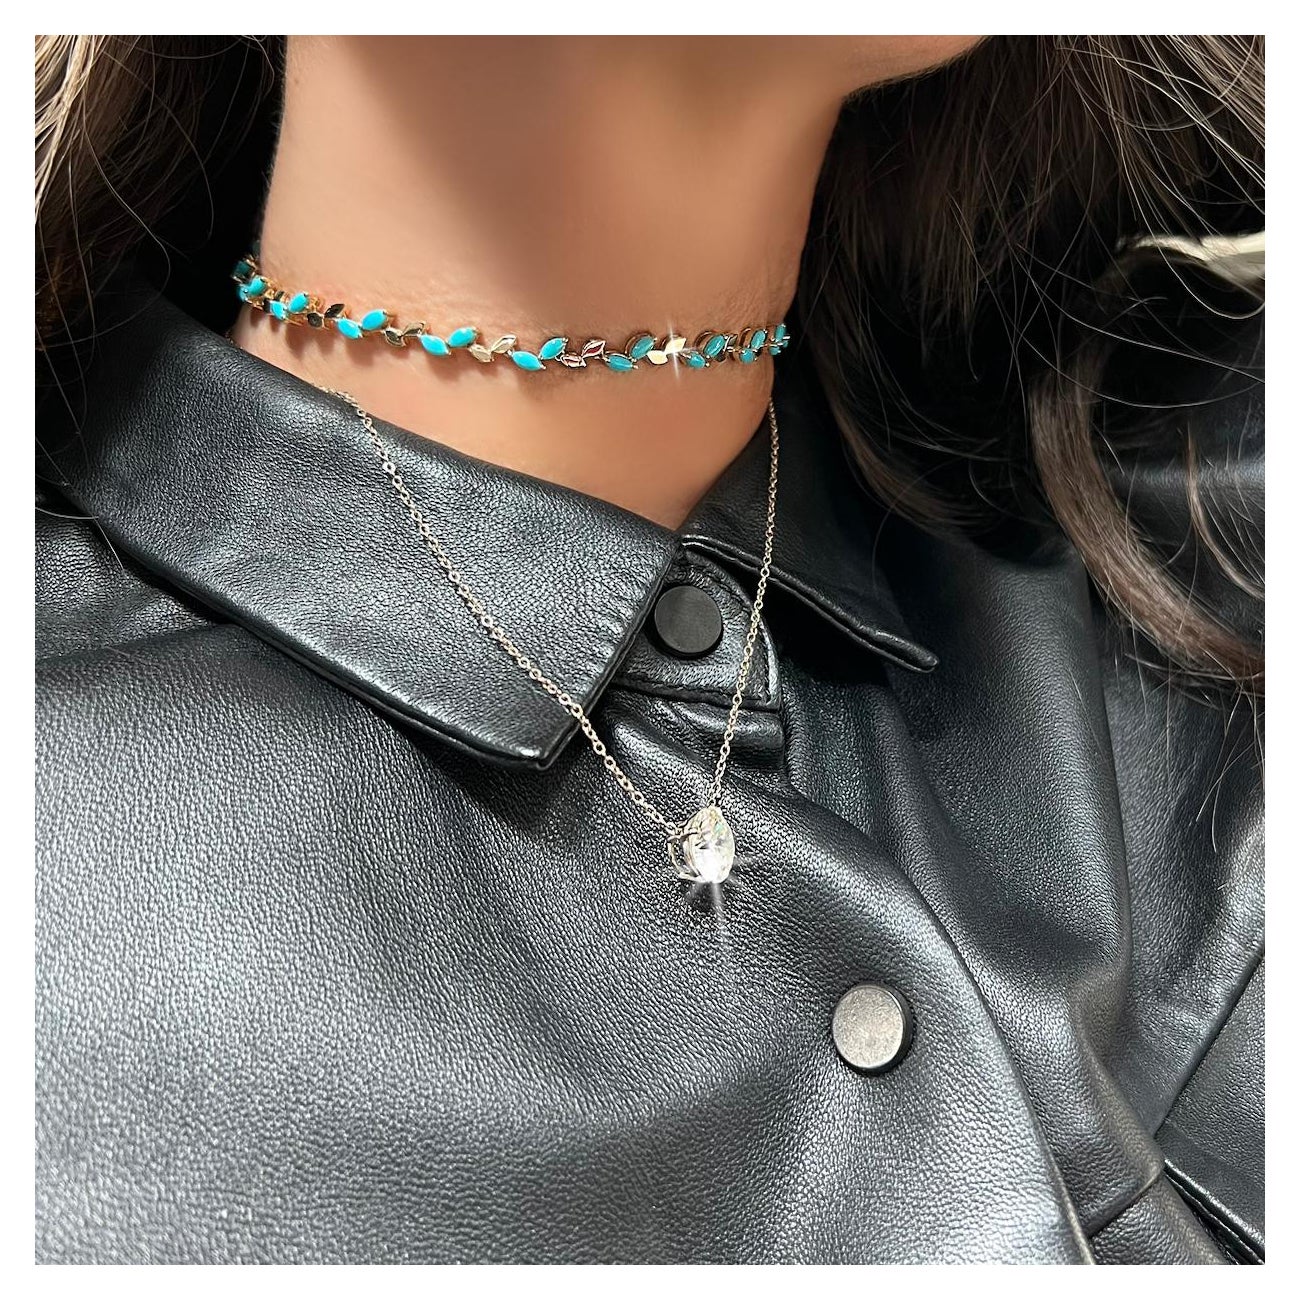 The necklace features a delicate chain made from high-quality 18K gold-plated sterling silver

Stone :	Turquoise
Carat Weight :	3.55 ttcw
Metal Type :	Solid Gold
Metal Purity :	14K
Metal Color :	Yellow
Metal Weight : 11.11 grams
Dimensions :	16